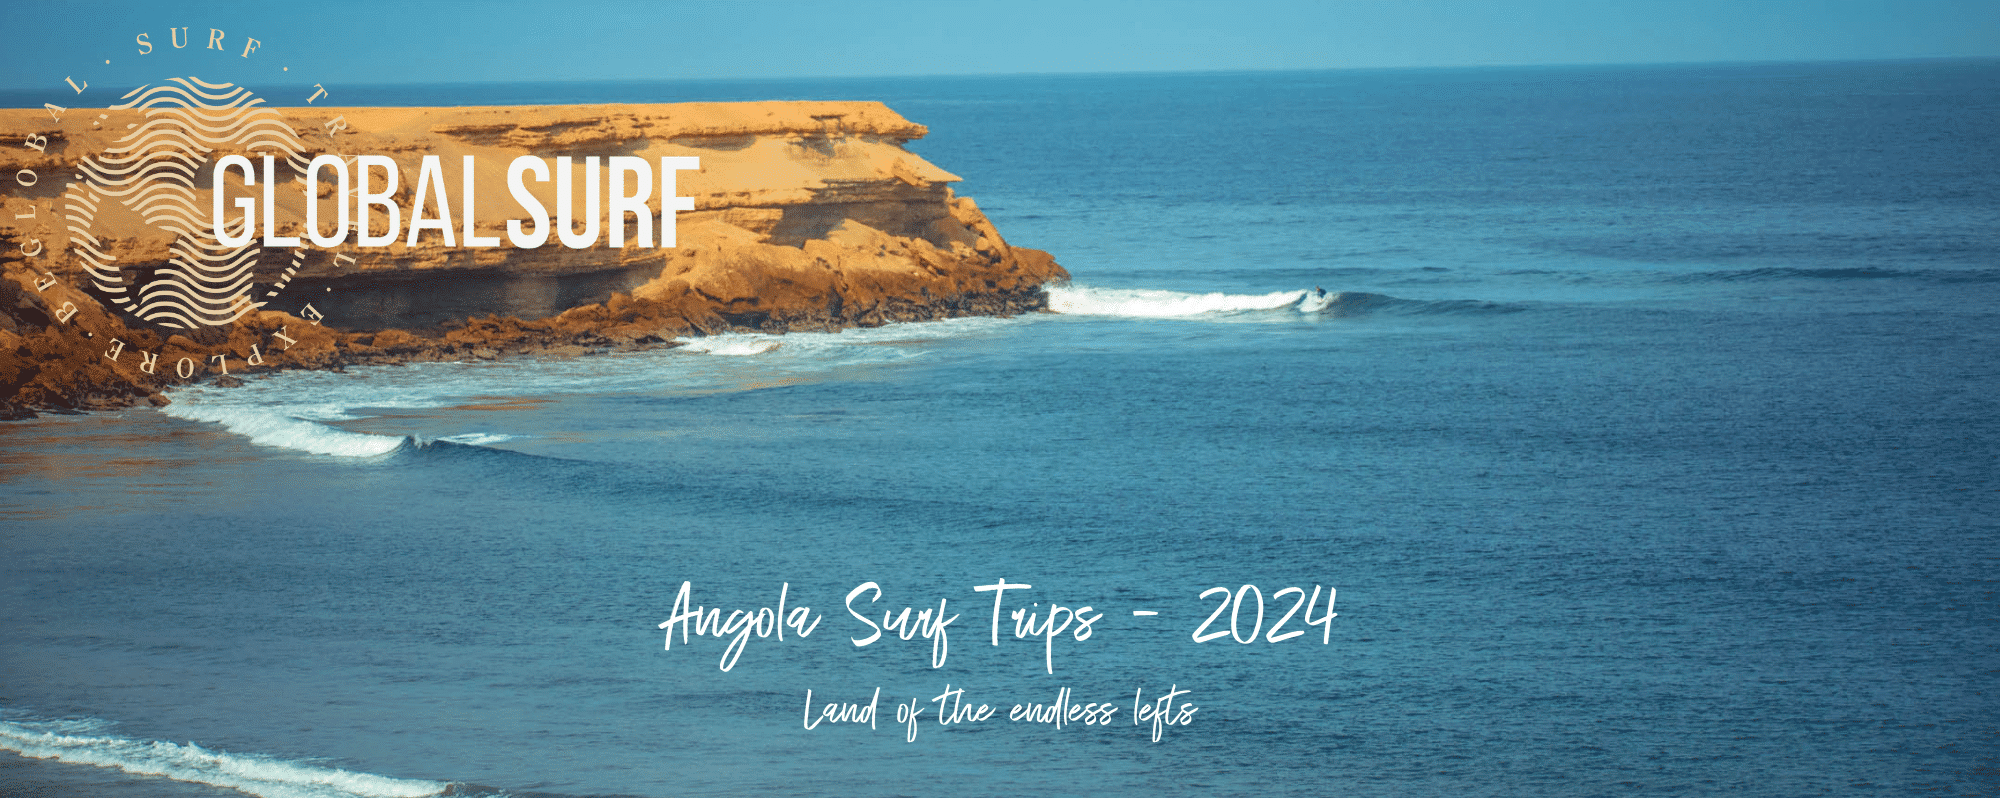 angol surf trips l of the